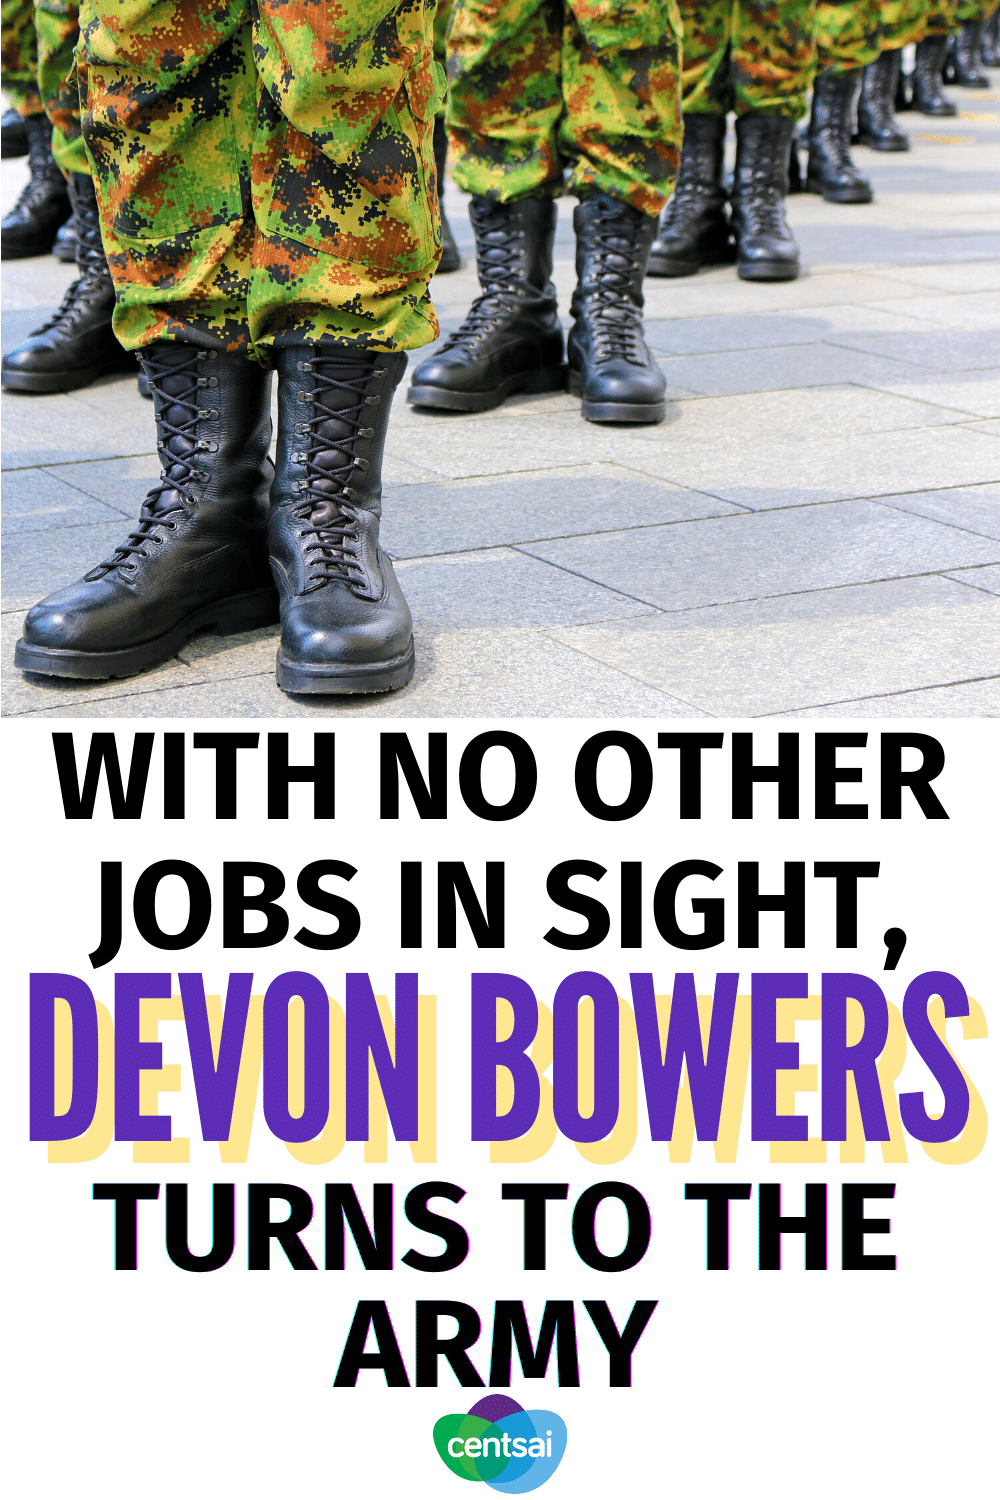 With No Other Job in Sight, Devon Bowers Turns to the Army